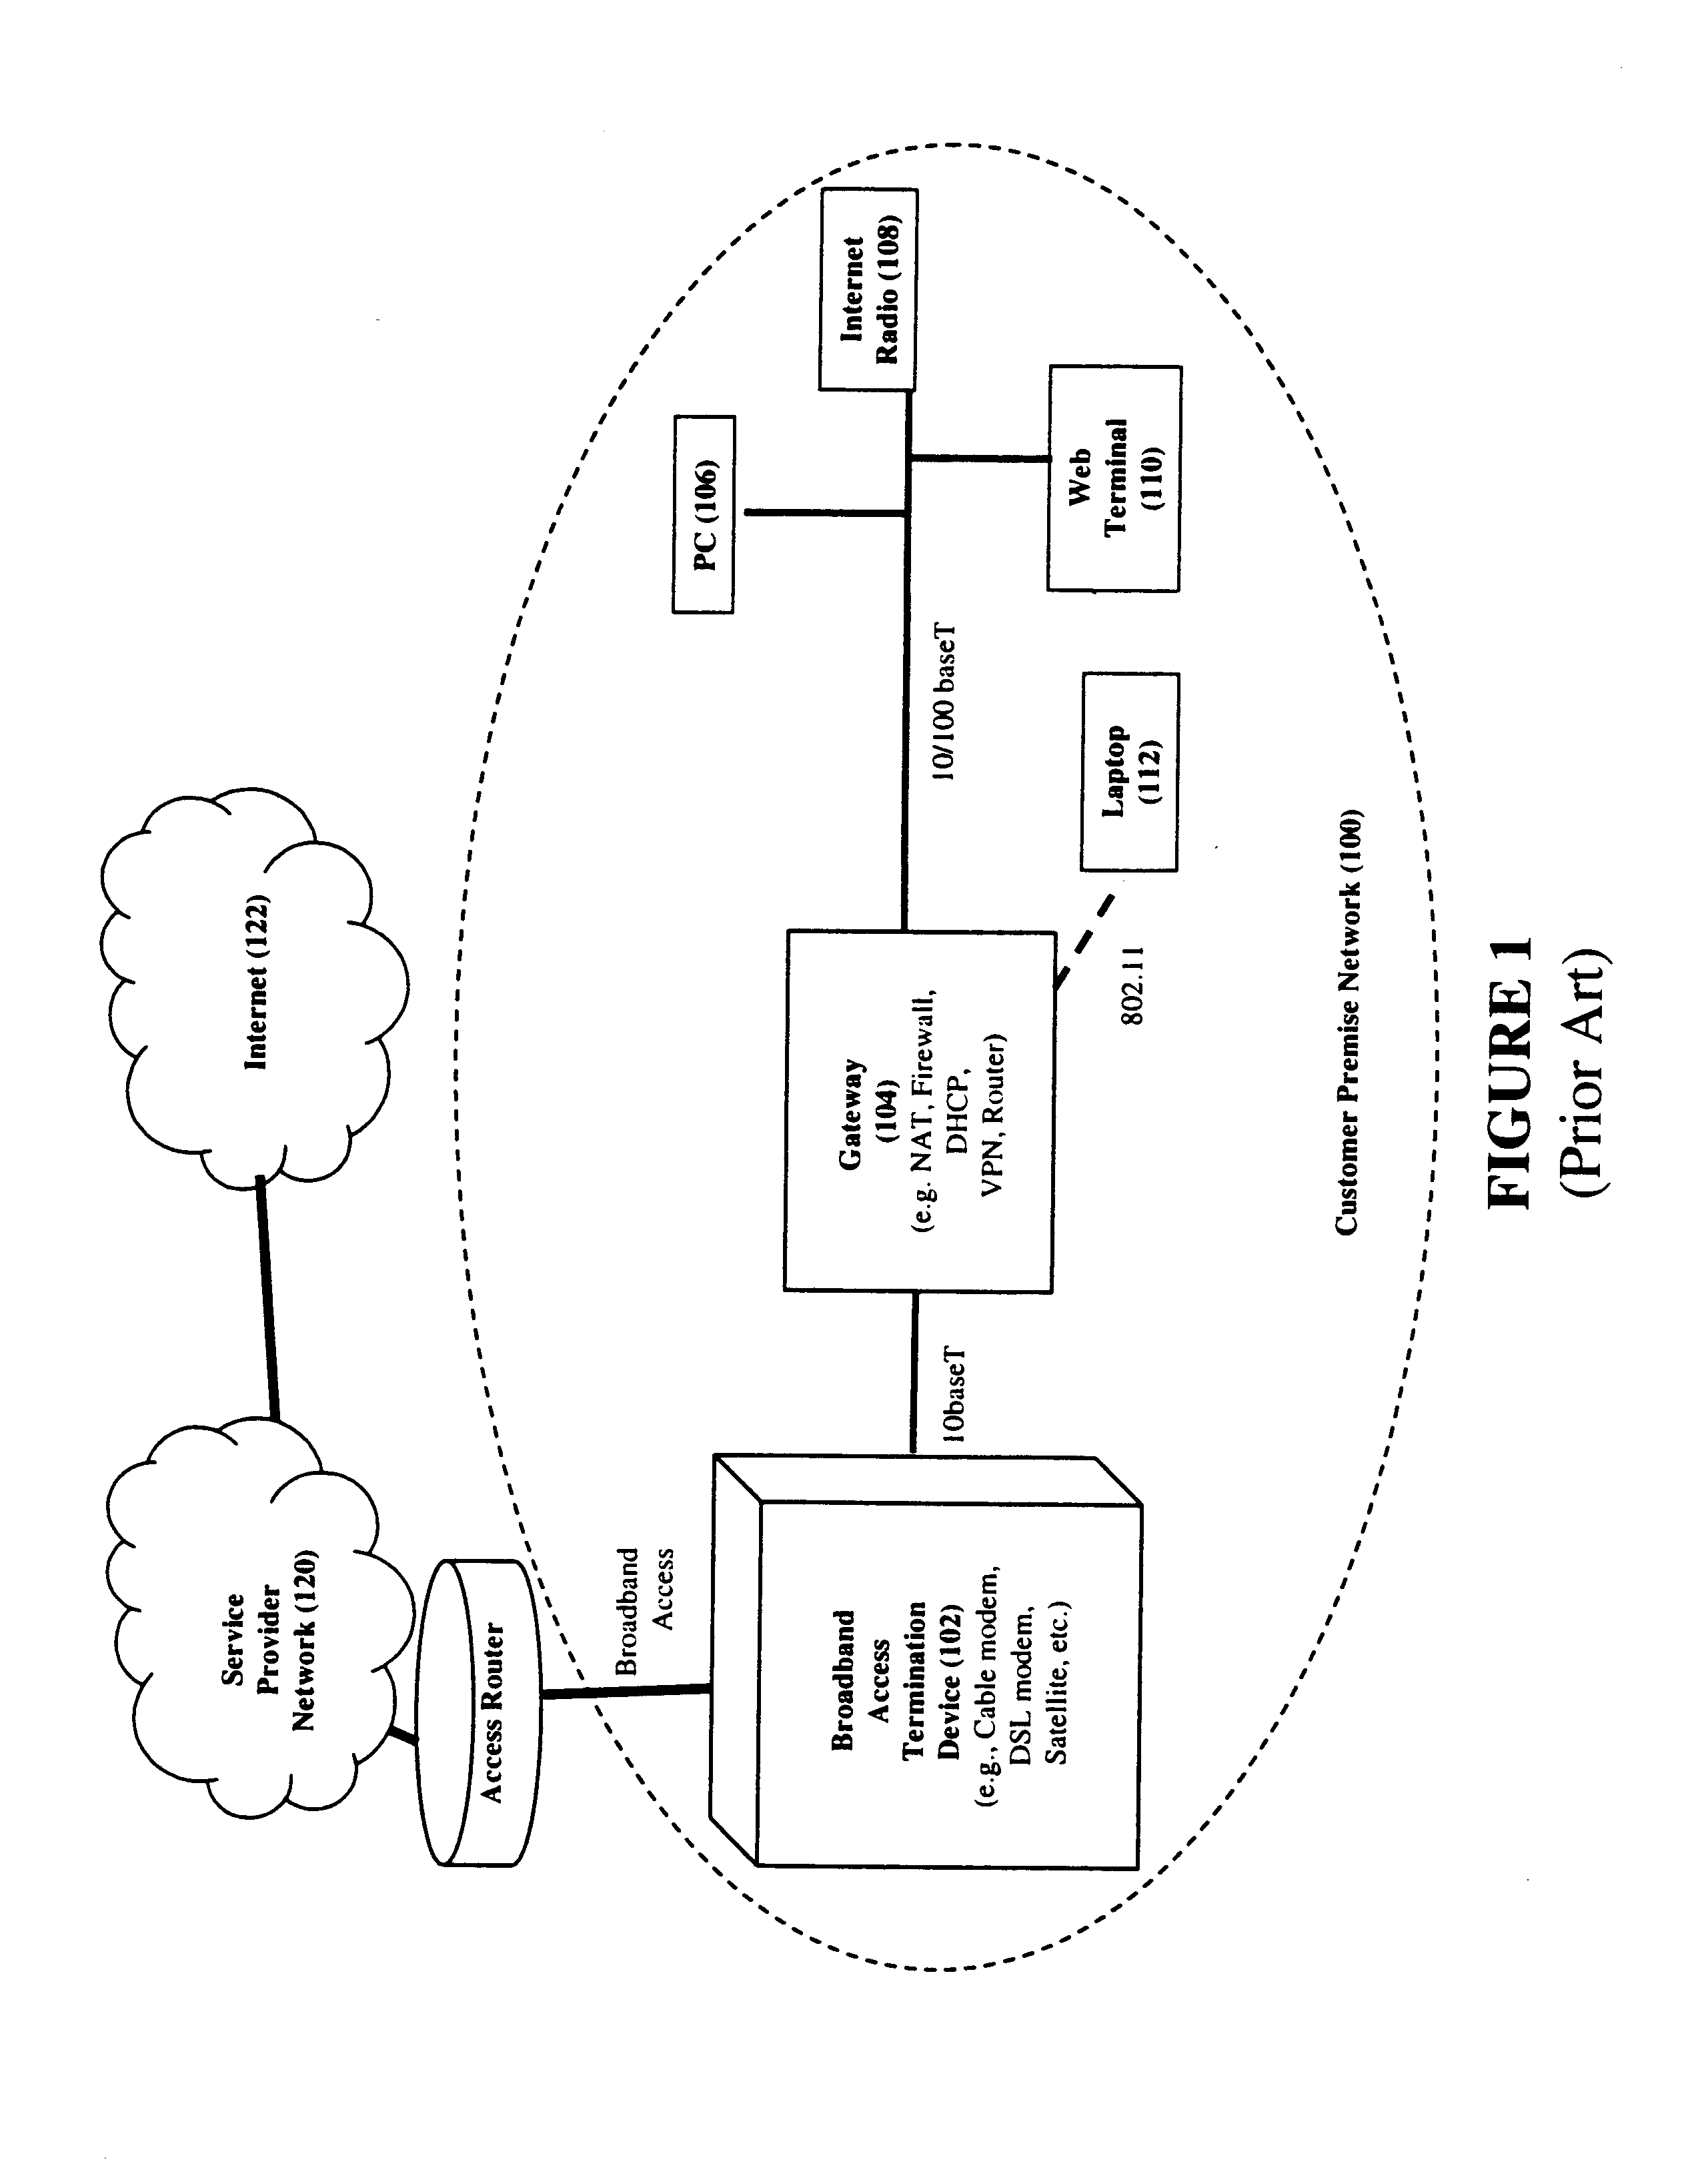 Template based configuration and validation of a network for enabling a requested service to be compatible with the previously enabled services